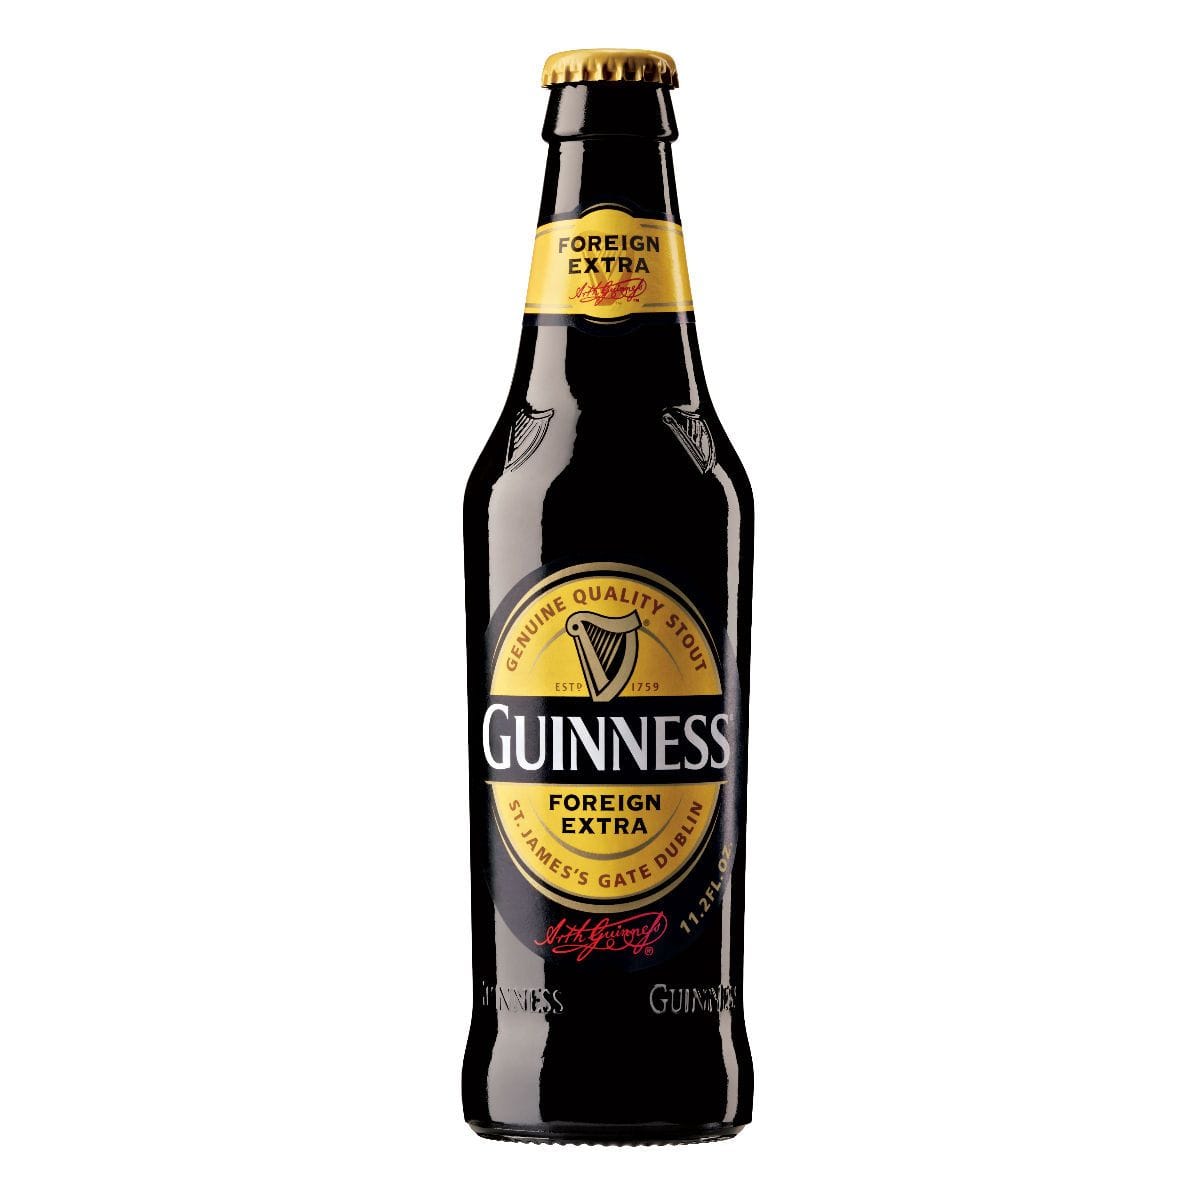 Guinness Foreign Extra Stout - Finley Beer